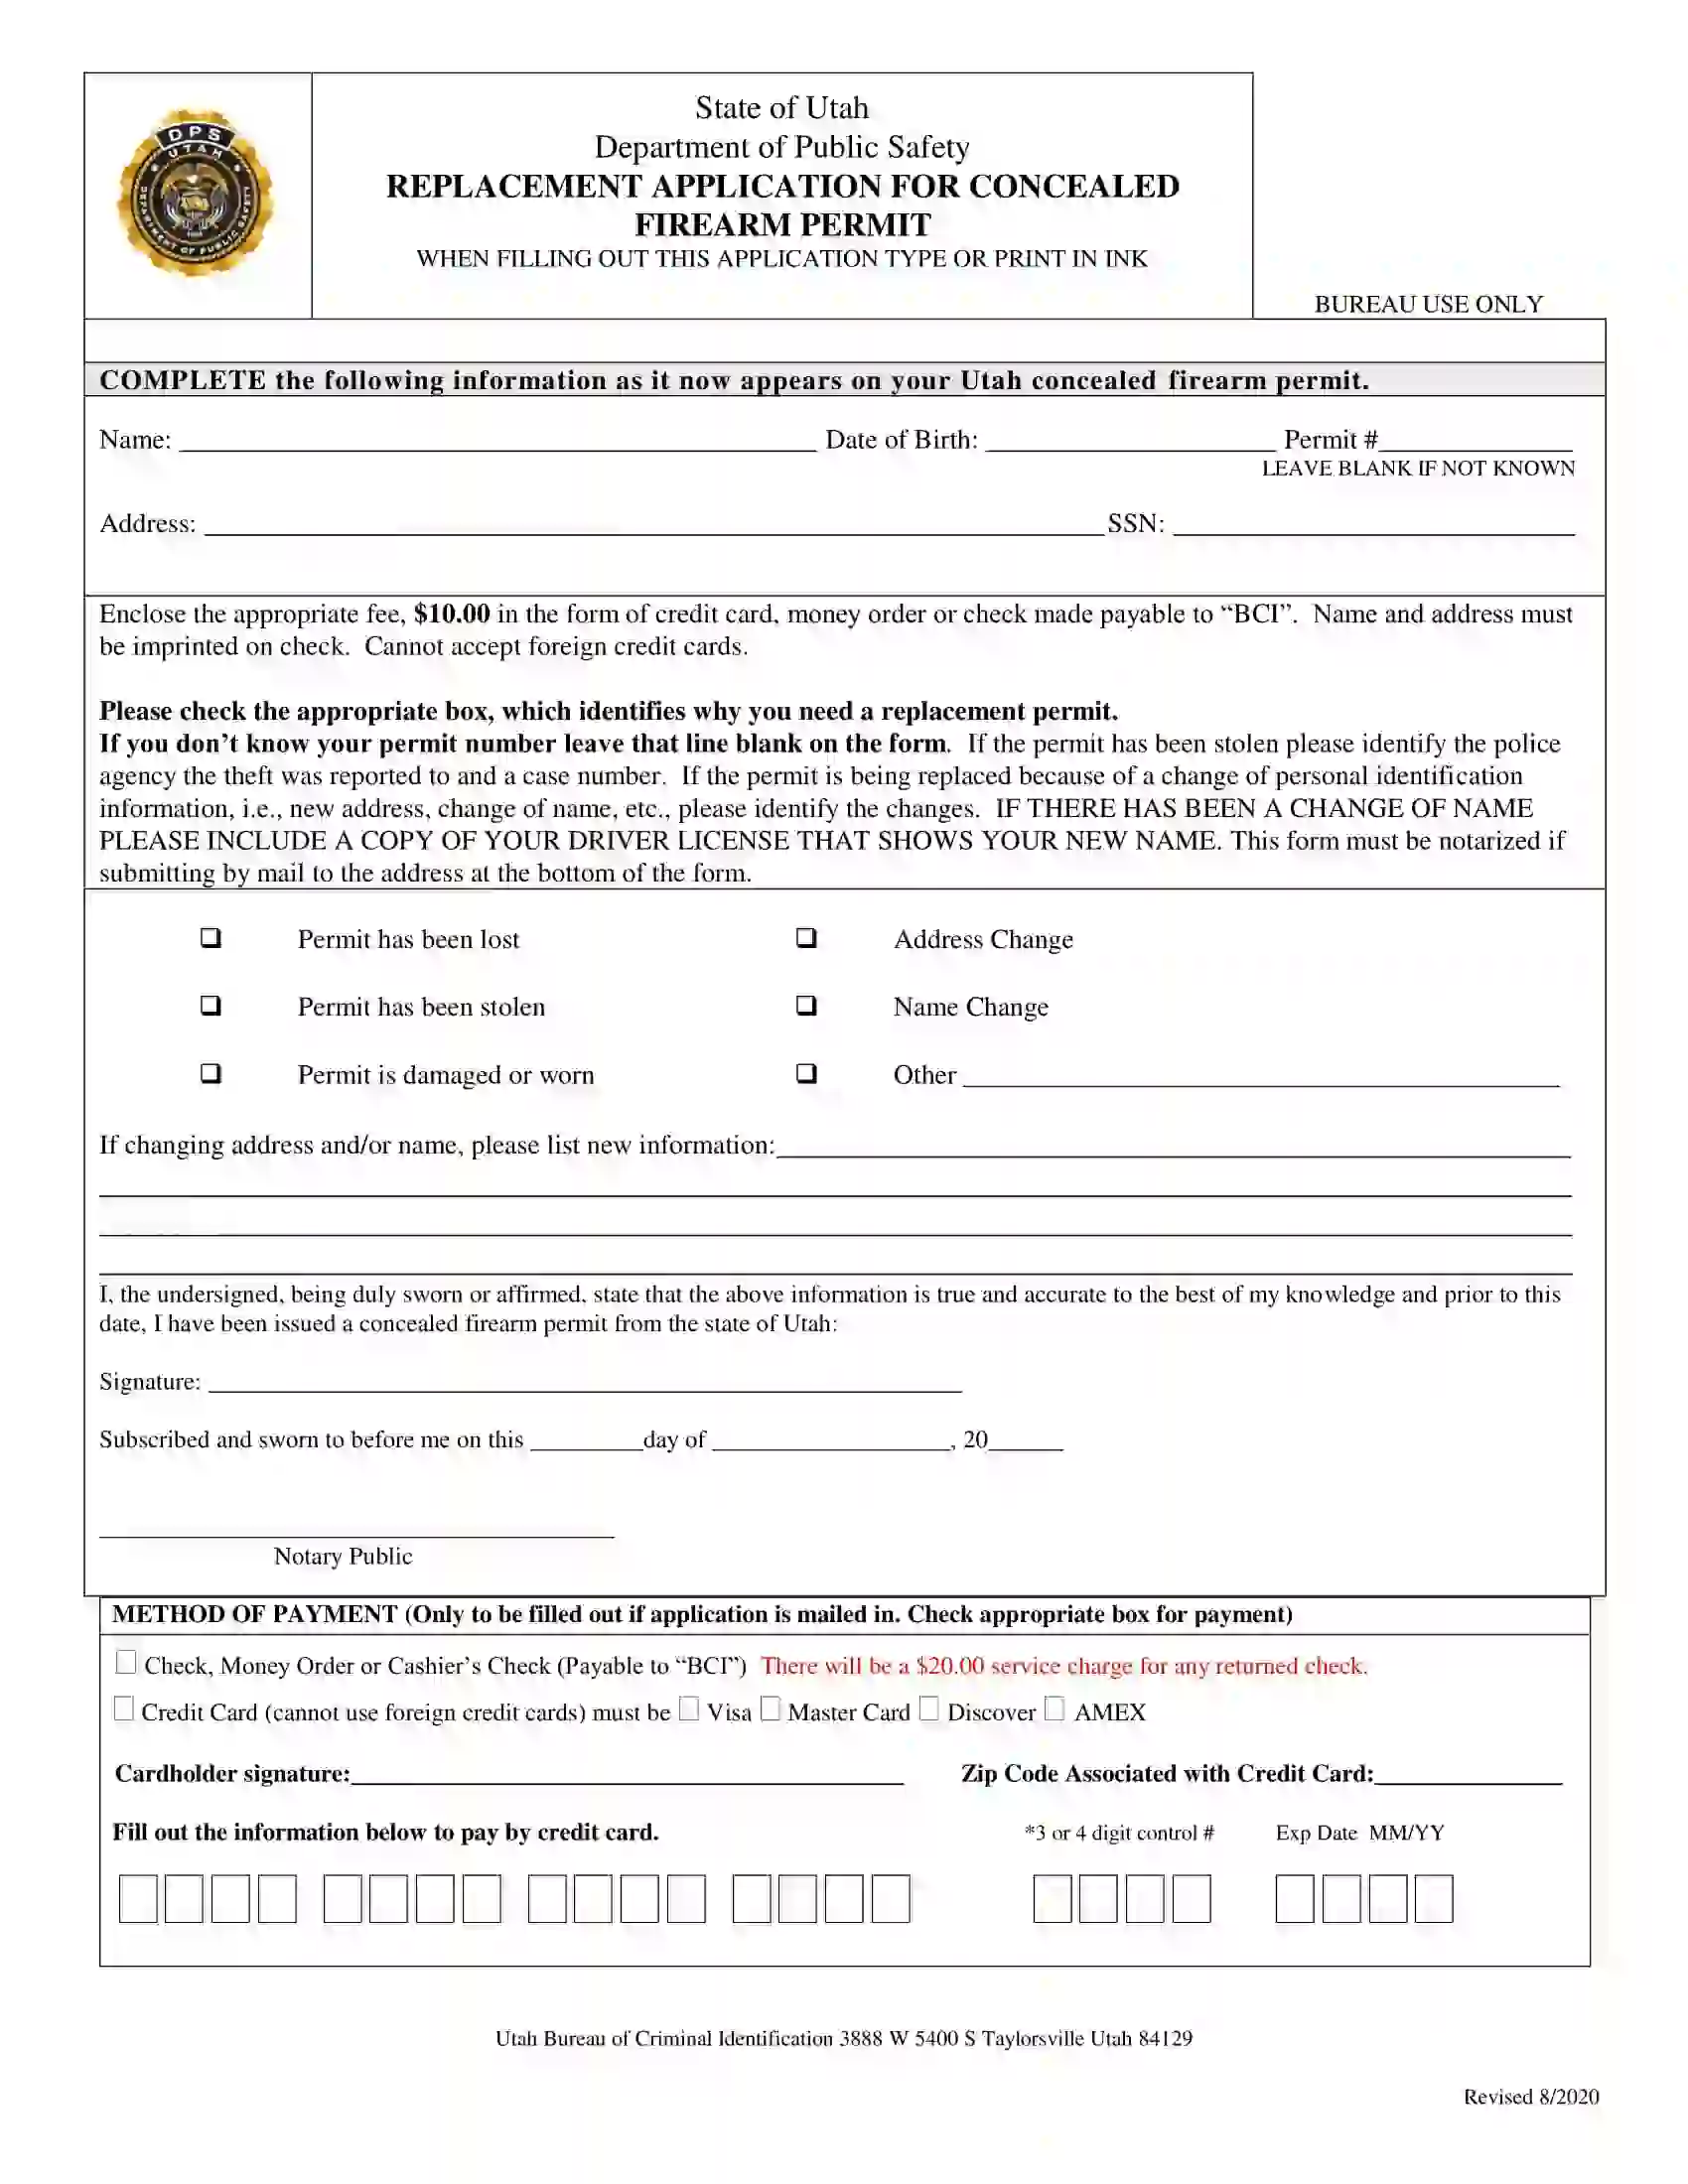 Concealed Firearm Permit Replacement Form